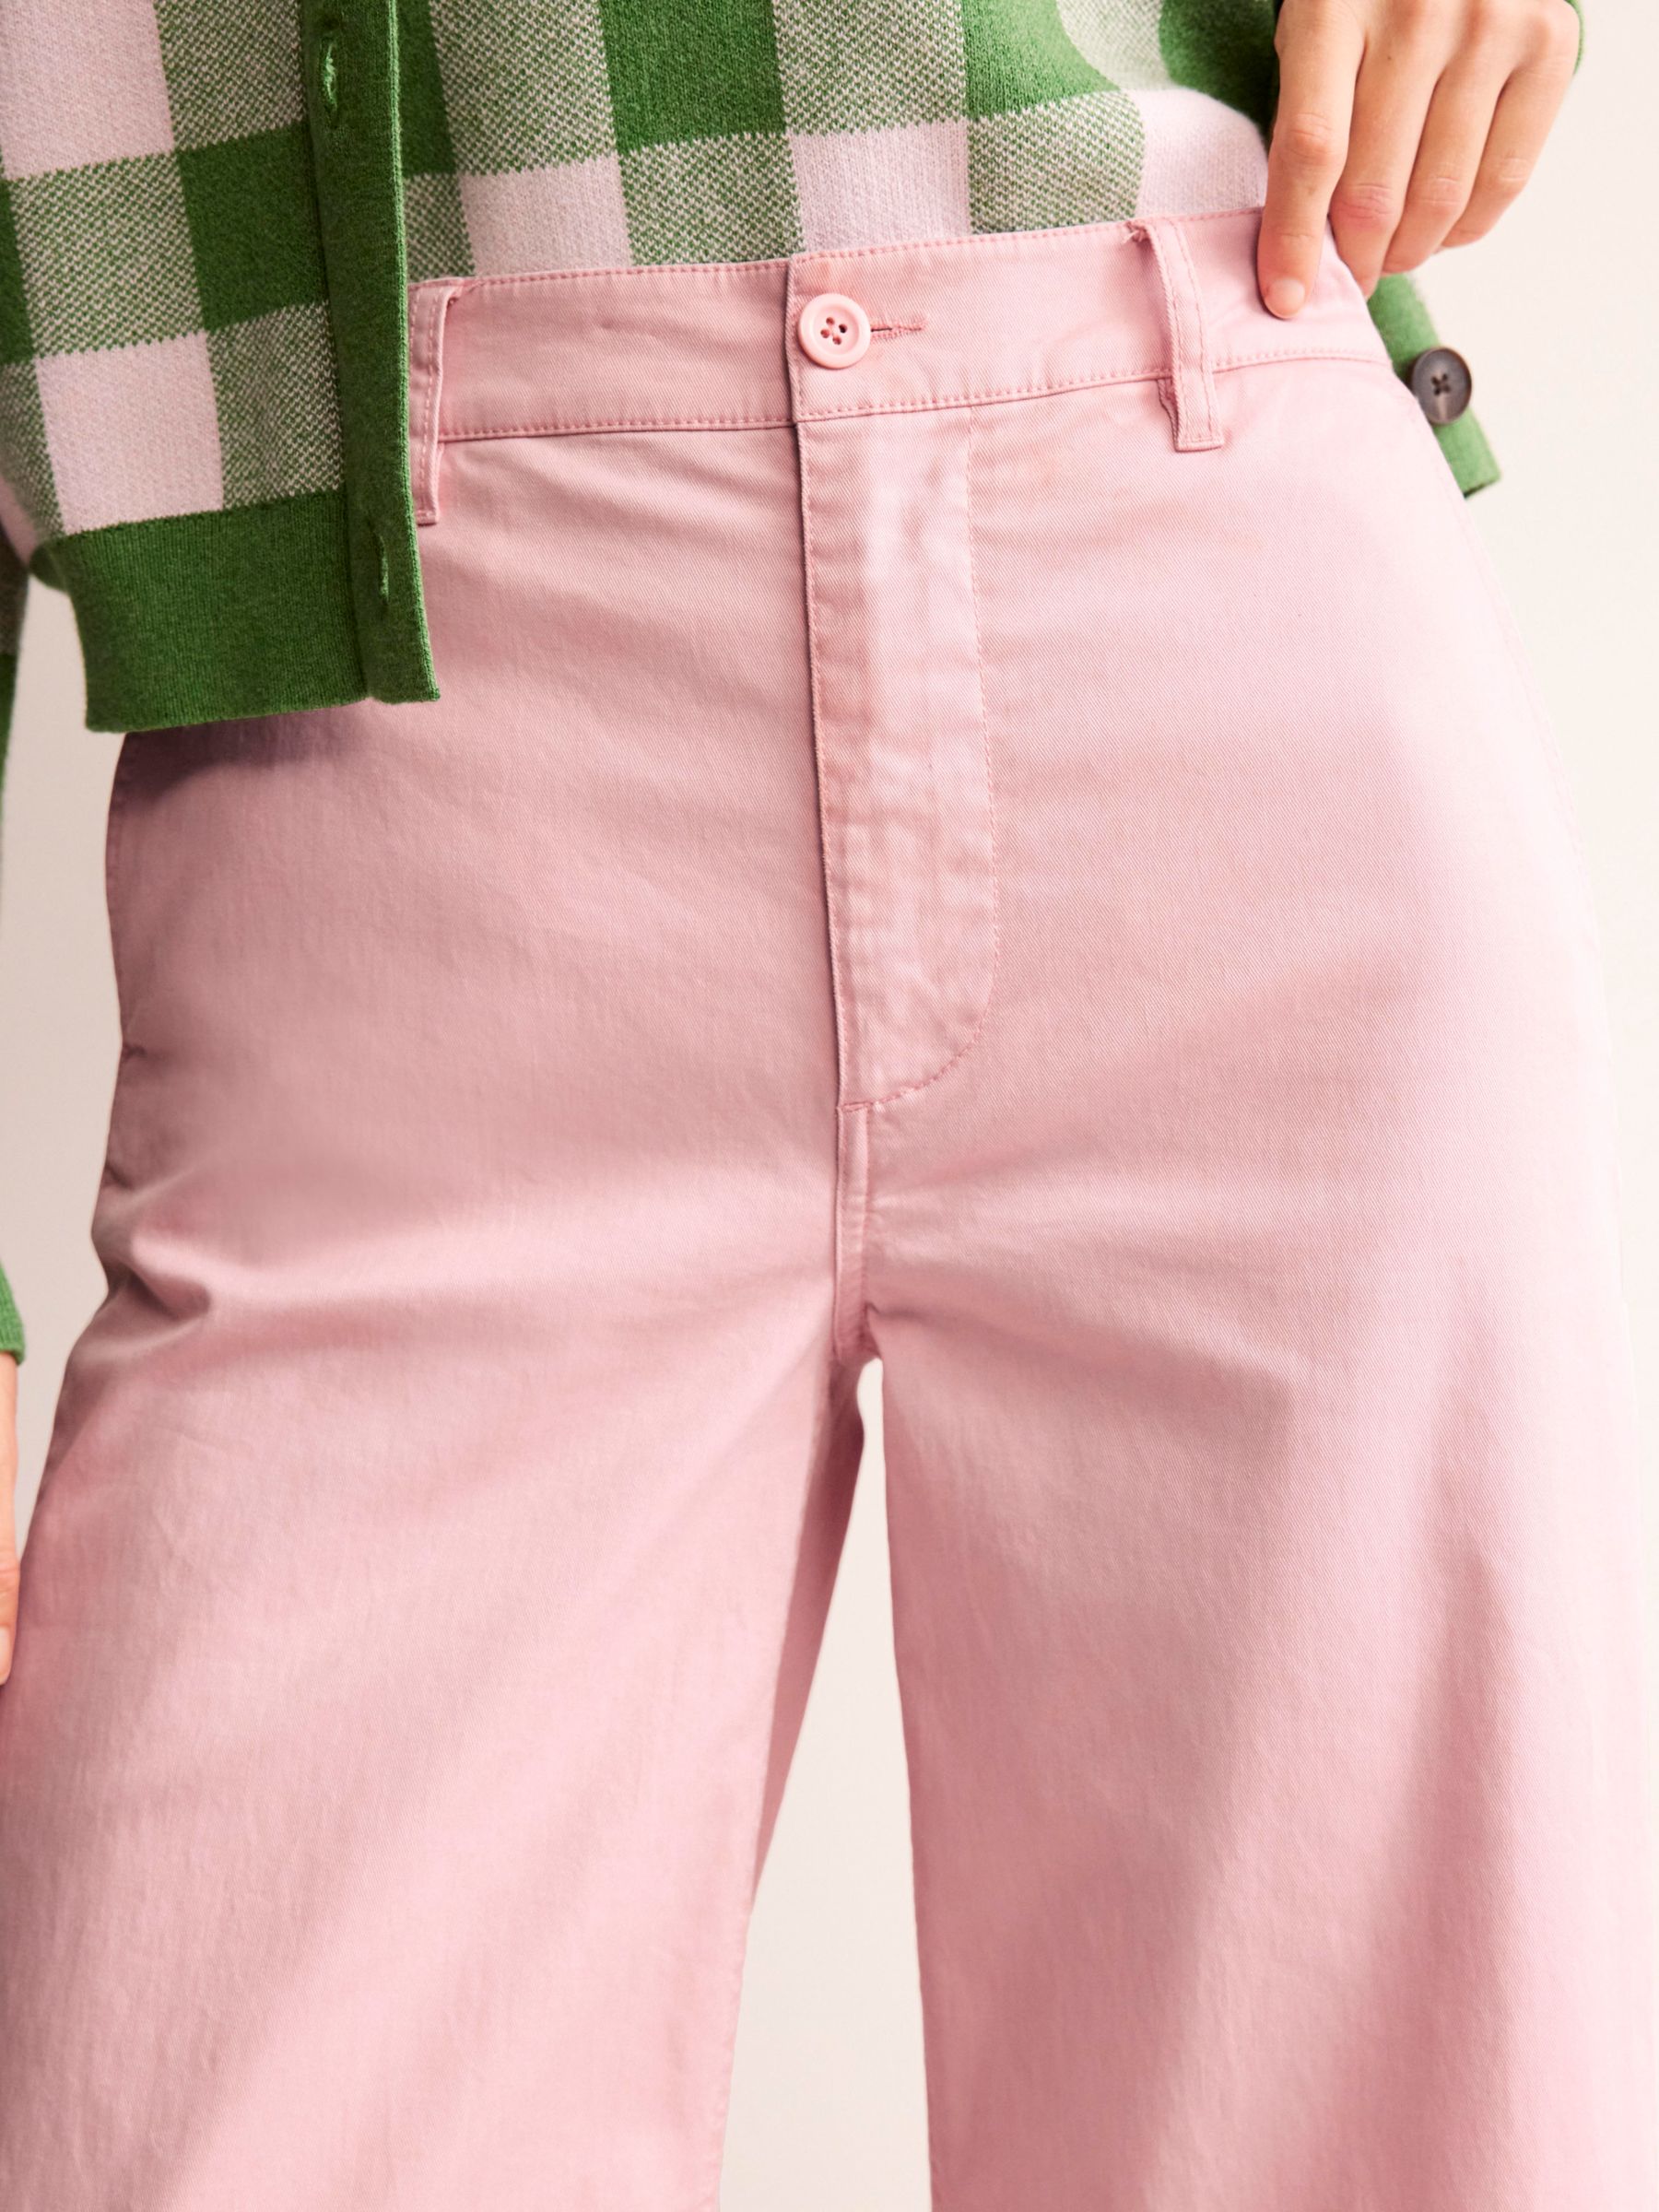 Buy Boden Barnsbury Cropped Wide Leg Trousers, Blush Online at johnlewis.com